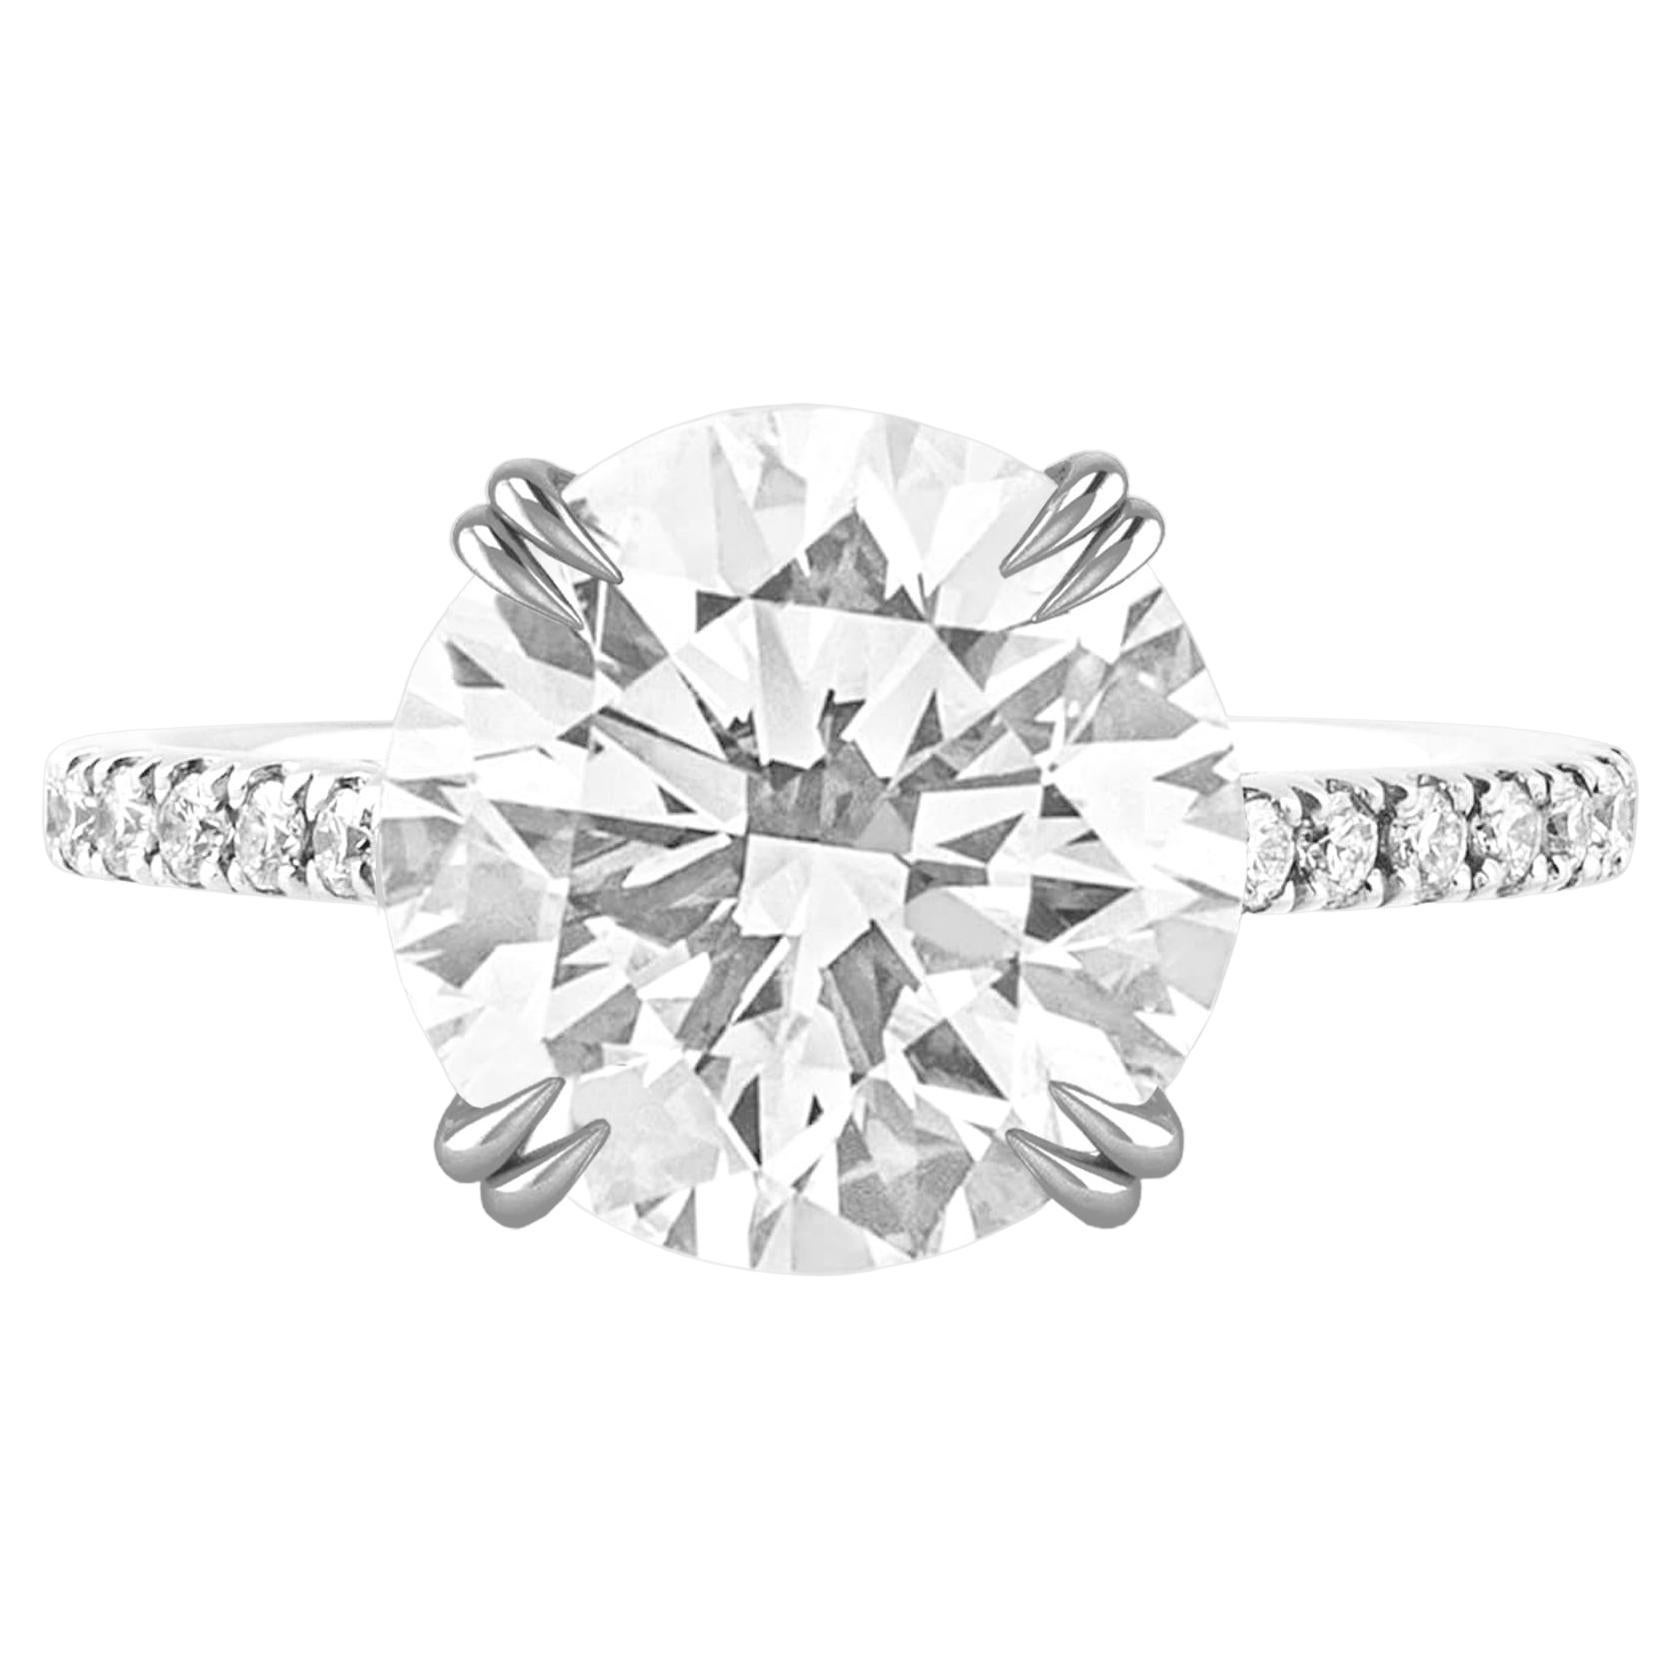 GIA Certified 3 Carat D Color VS1 Clarity Round Brilliant Cut Diamond Ring For Sale